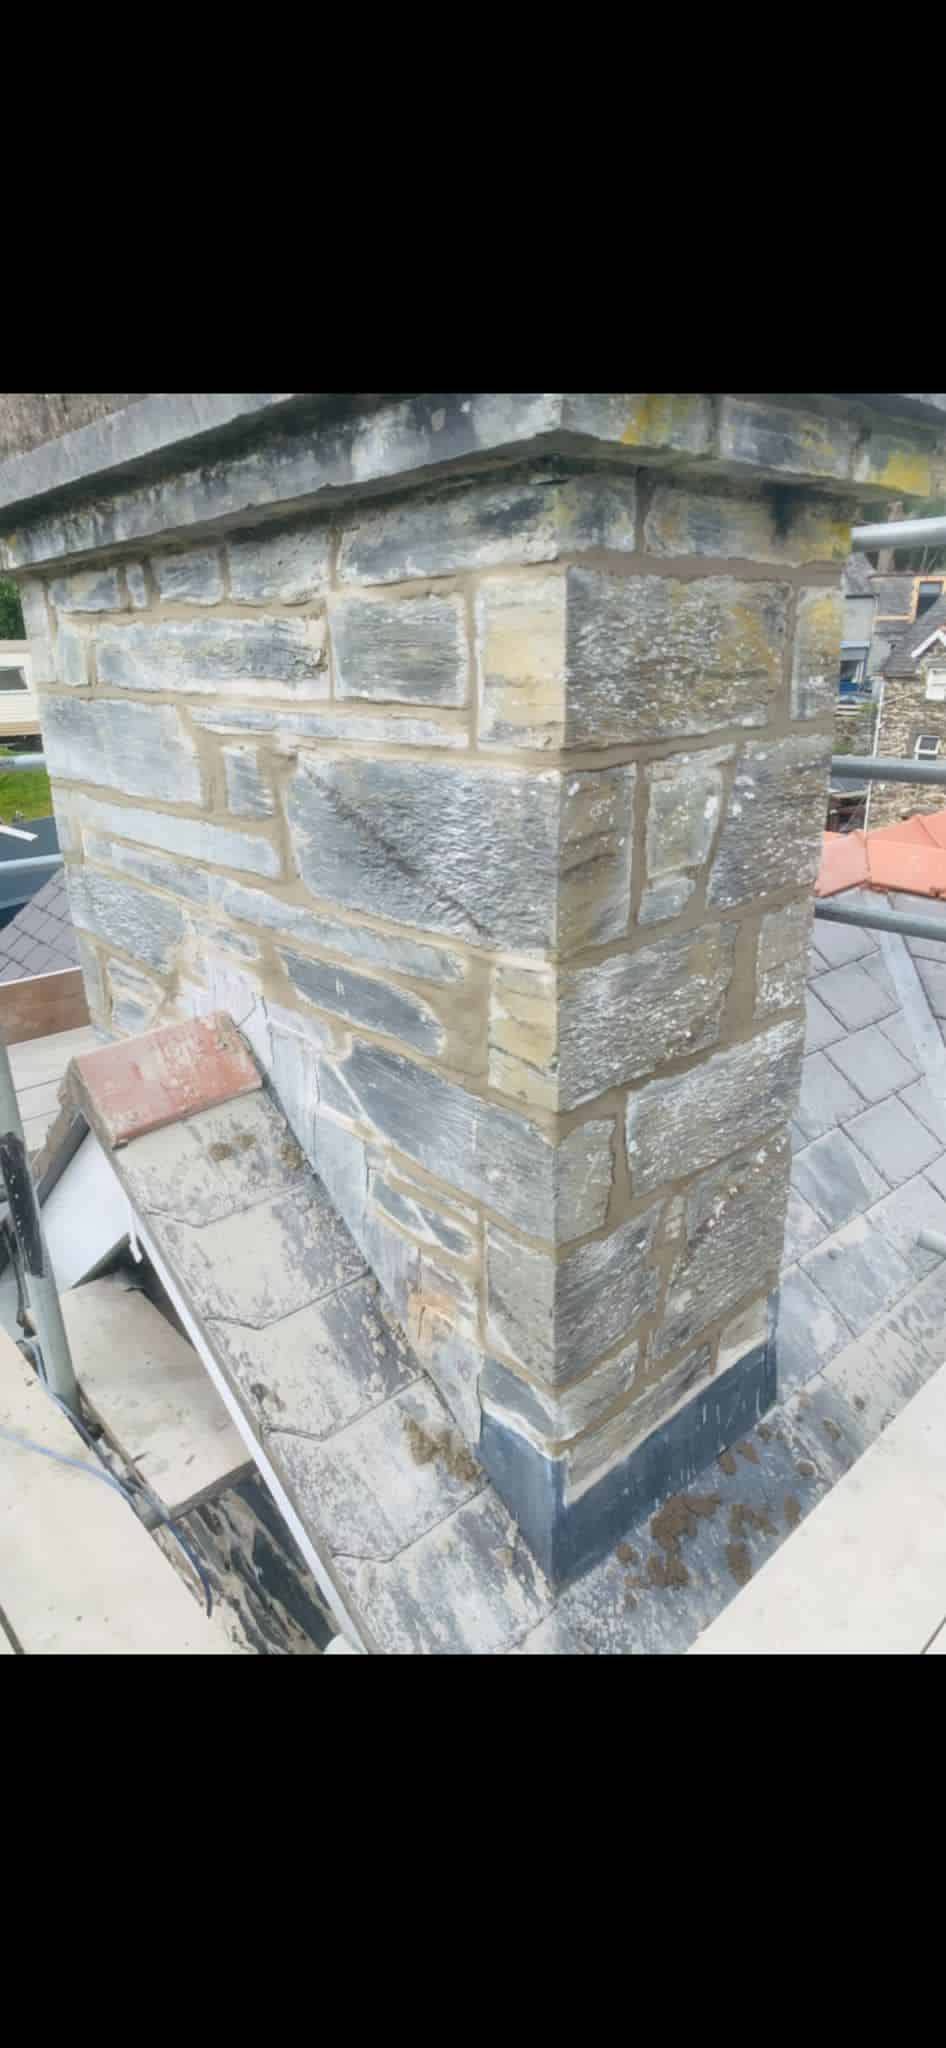 Chimney Contractors North Wales DD Roofing